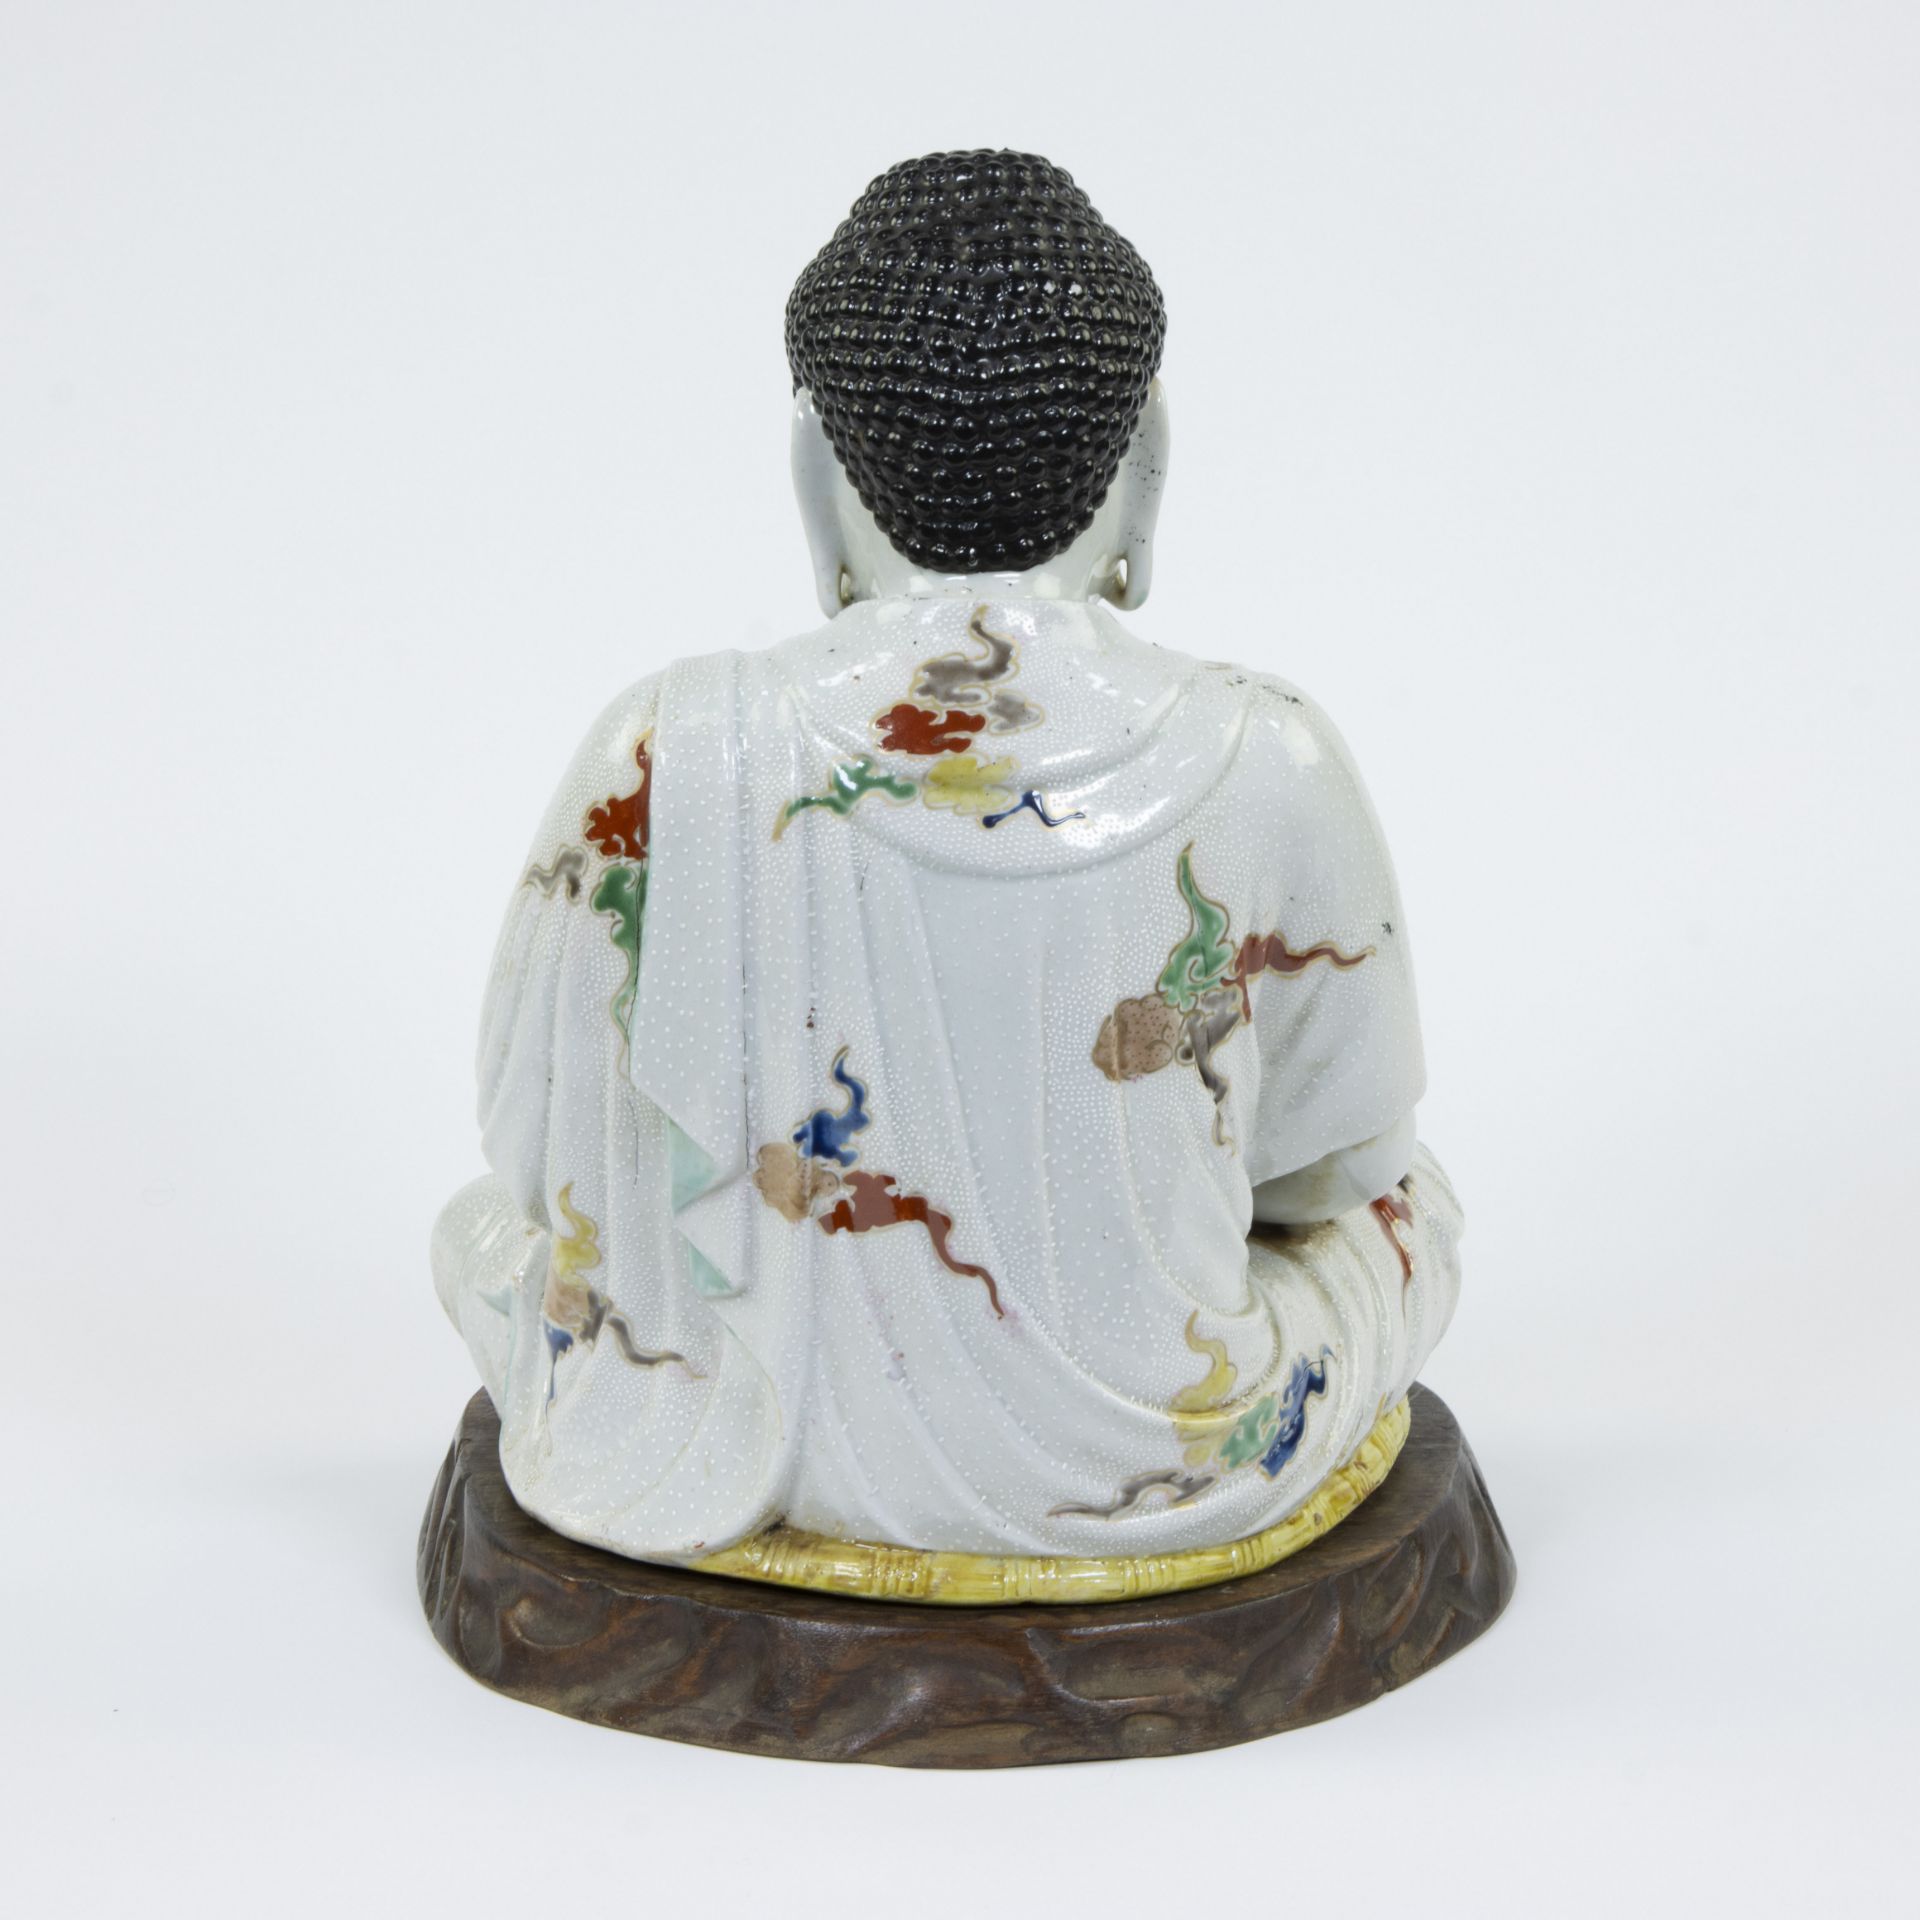 Japanese porcelain statue of a seated Buddha on wooden plinth, circa 1900s - Image 3 of 6